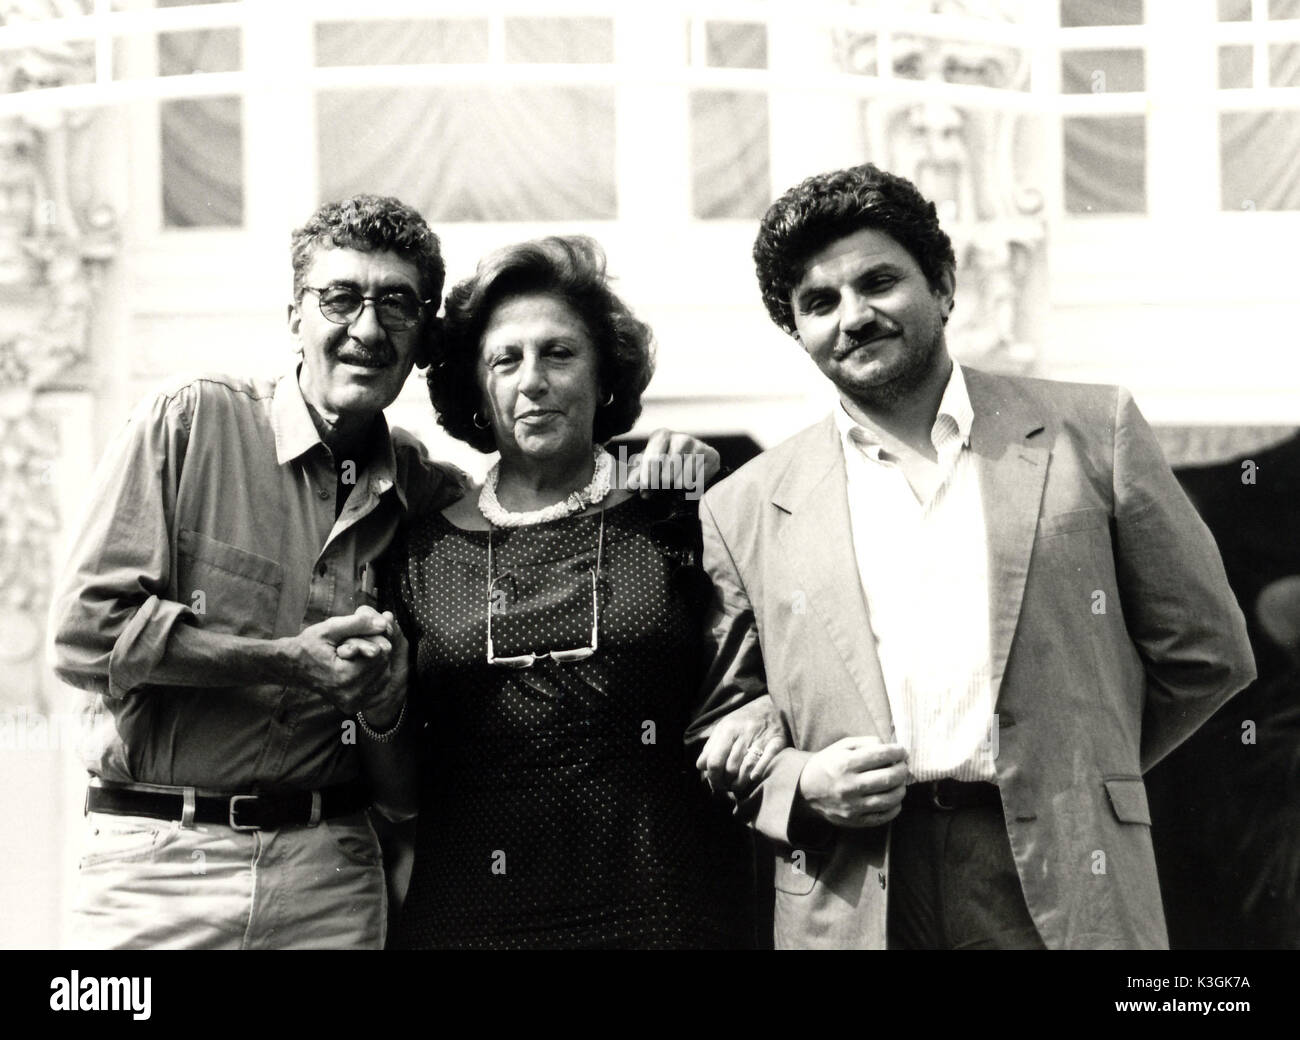 Film director DANIEL SCHMID, actress MADDALENA FELLINI and Festival co-director GIAN FRANCO MIRO GORI on the terrace of the Grand Hotel during the Rimini Film Festival Film director DANIEL SCHMID, actress MADDALENA FELLINI Stock Photo